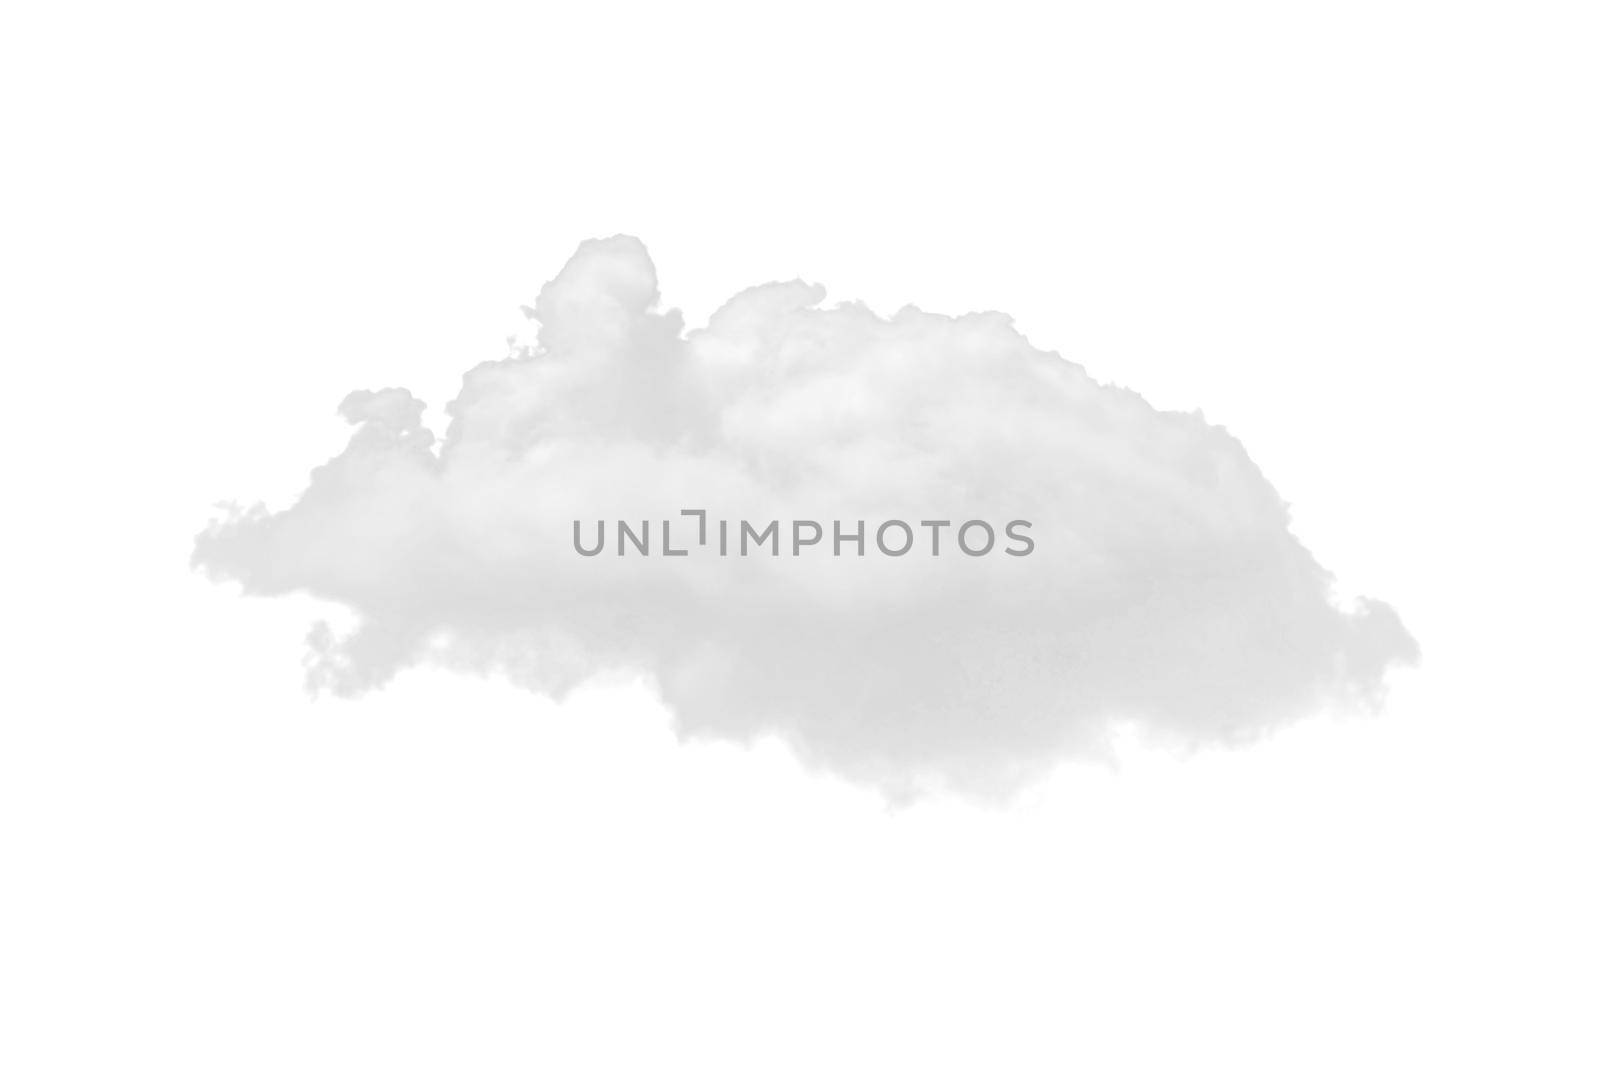 Nature single white clouds on white background. Cutout clouds element design for multi purpose use.